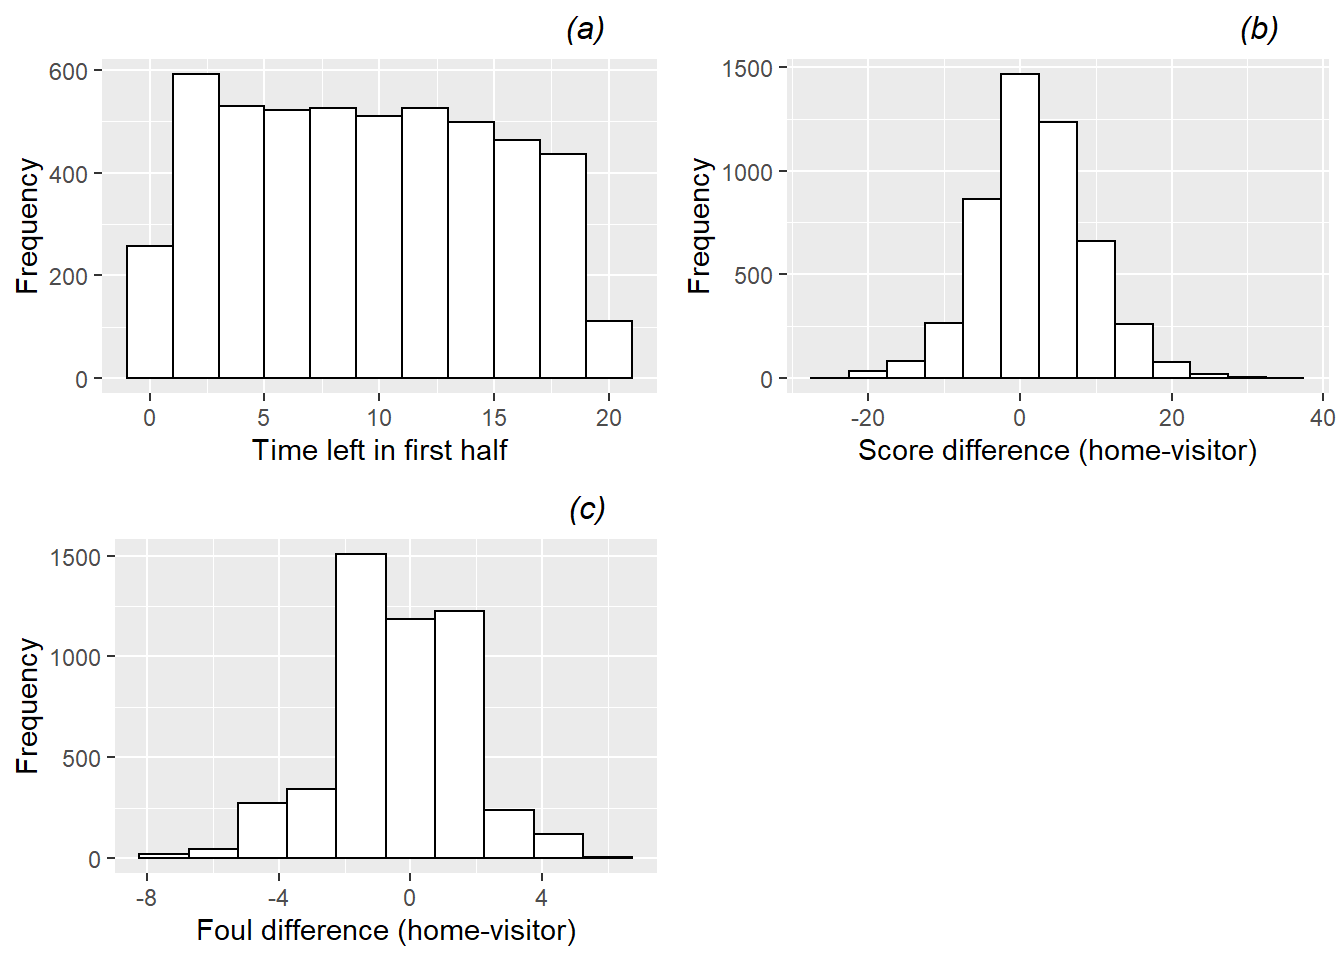 Histograms showing distributions of the 3 continuous Level One covariates: (a) time remaining, (b) score difference, and (c) foul difference.